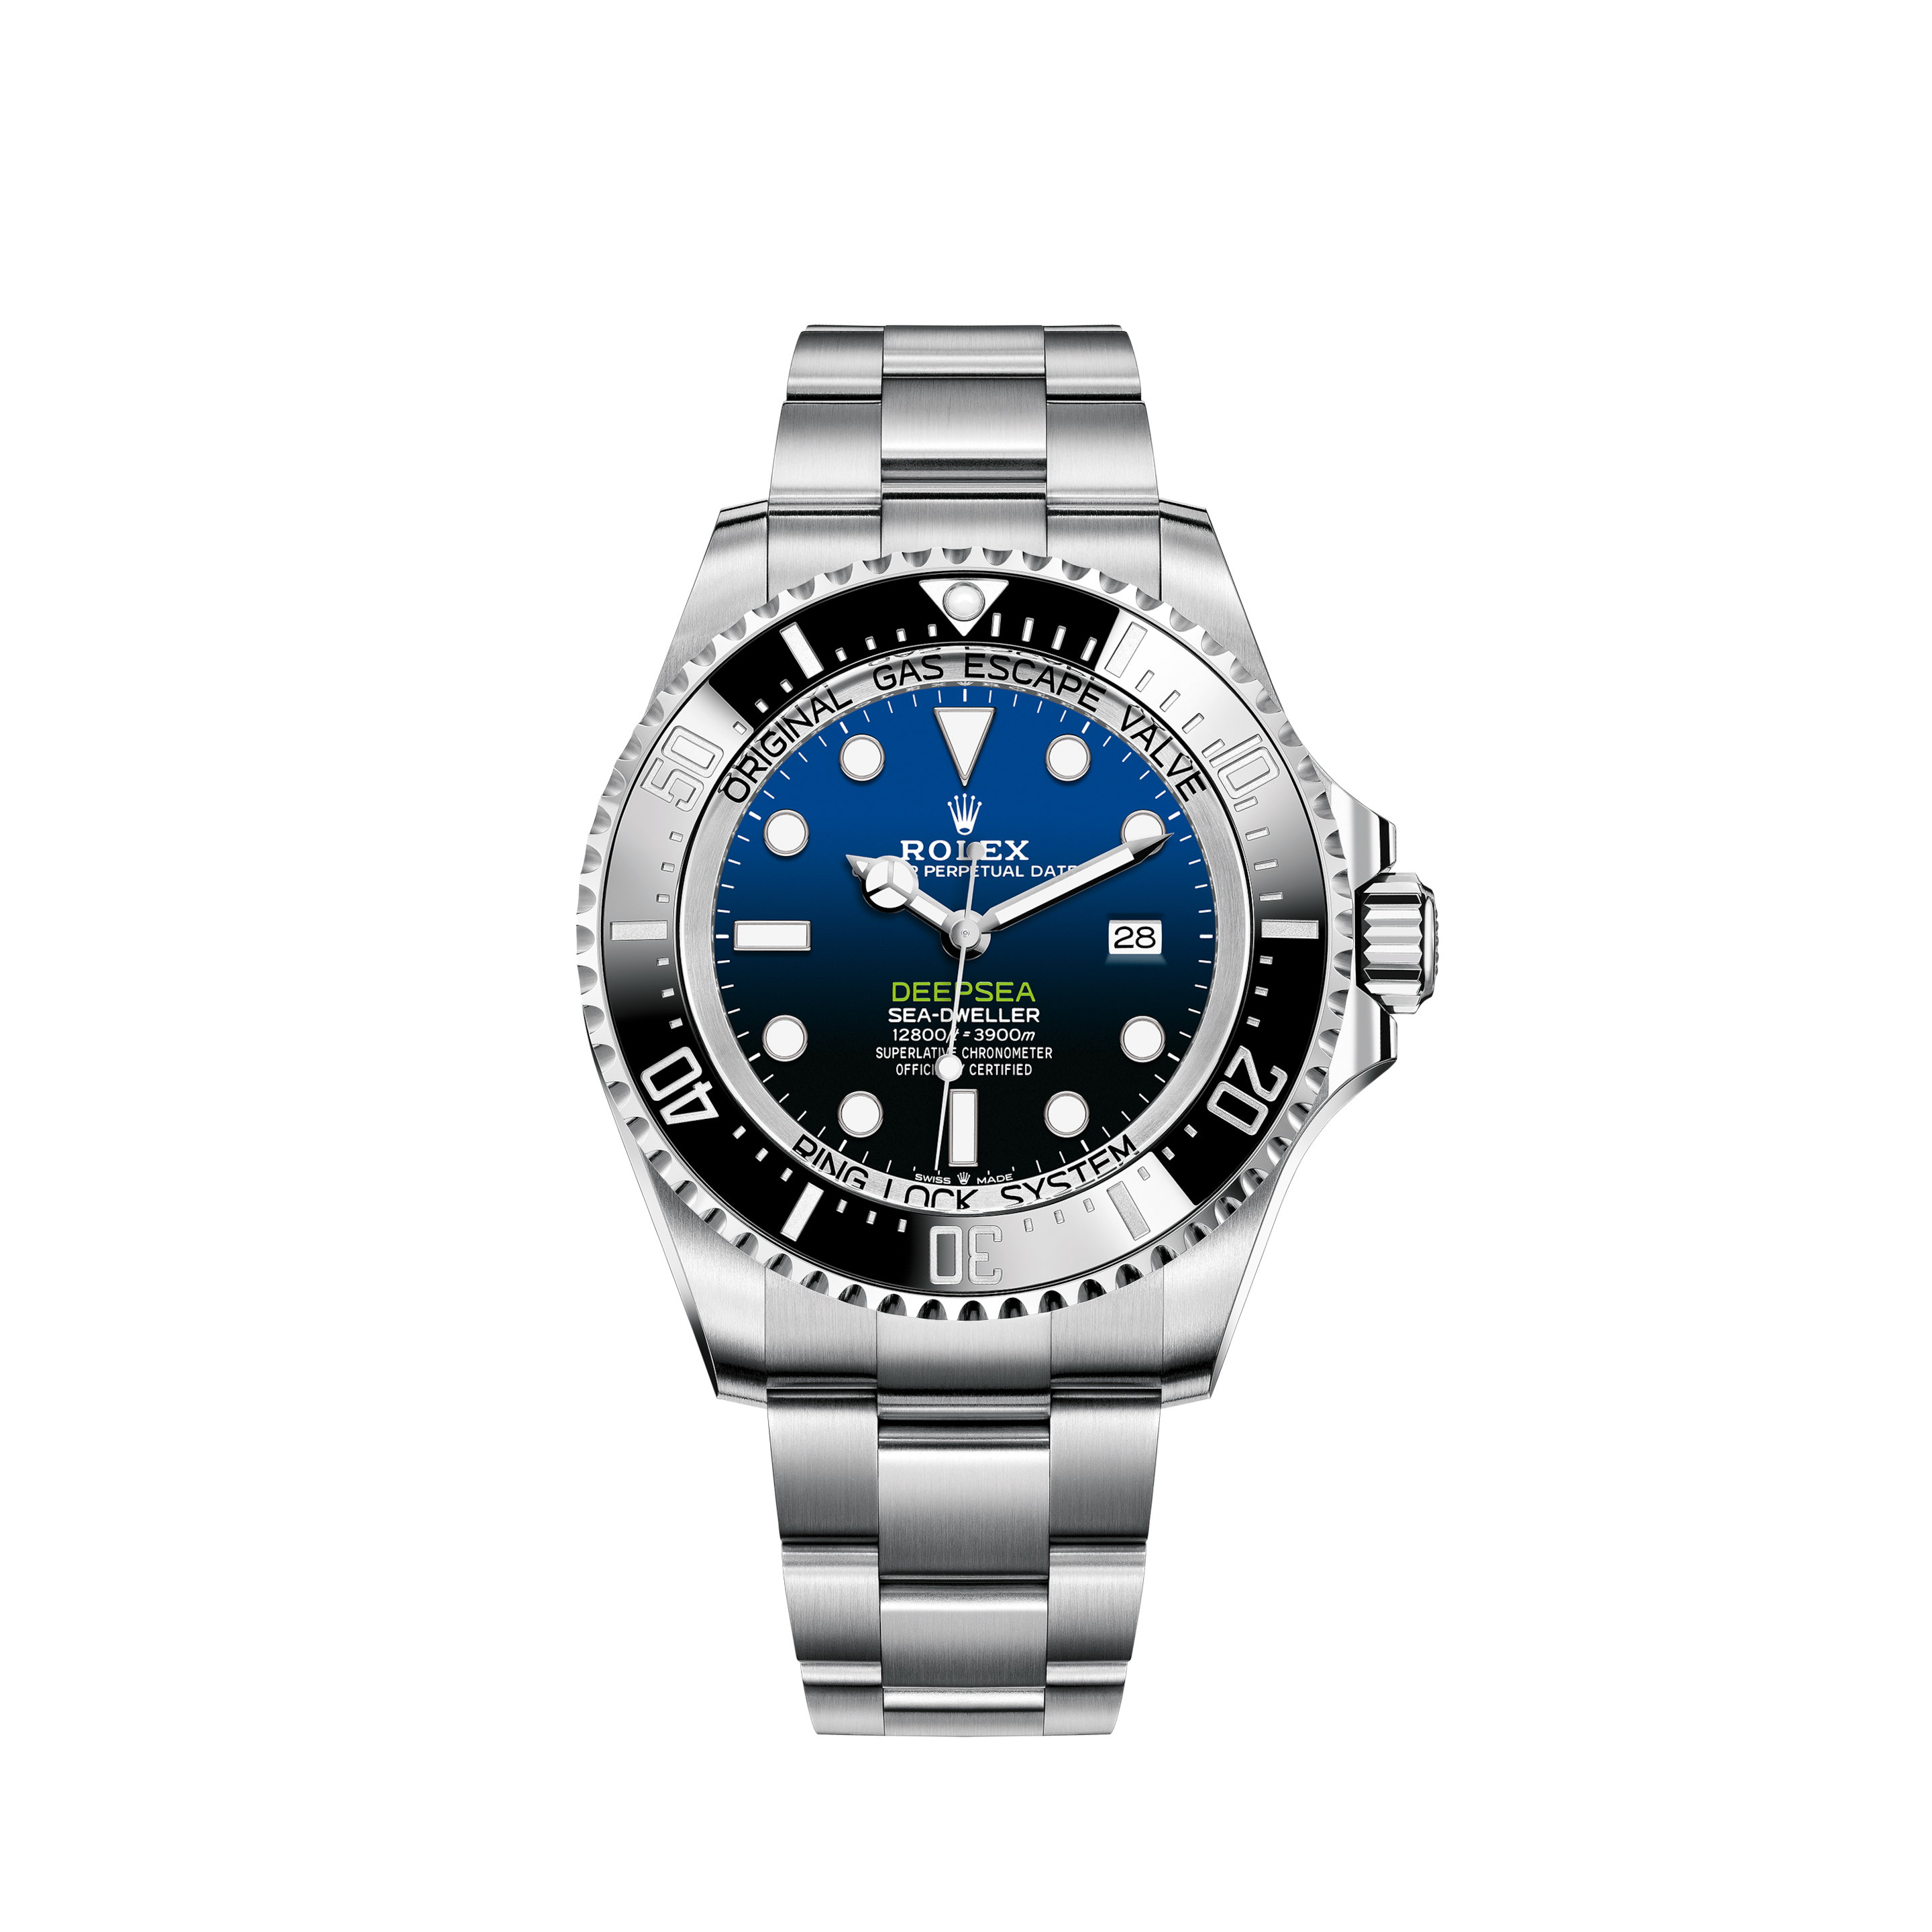 Rolex 126334 Datejust 41 Black Index/Stick Oyster Stainless SteelRolex 126334 Datejust 41 Blue Diamond Dial Oyster Stainless Steel